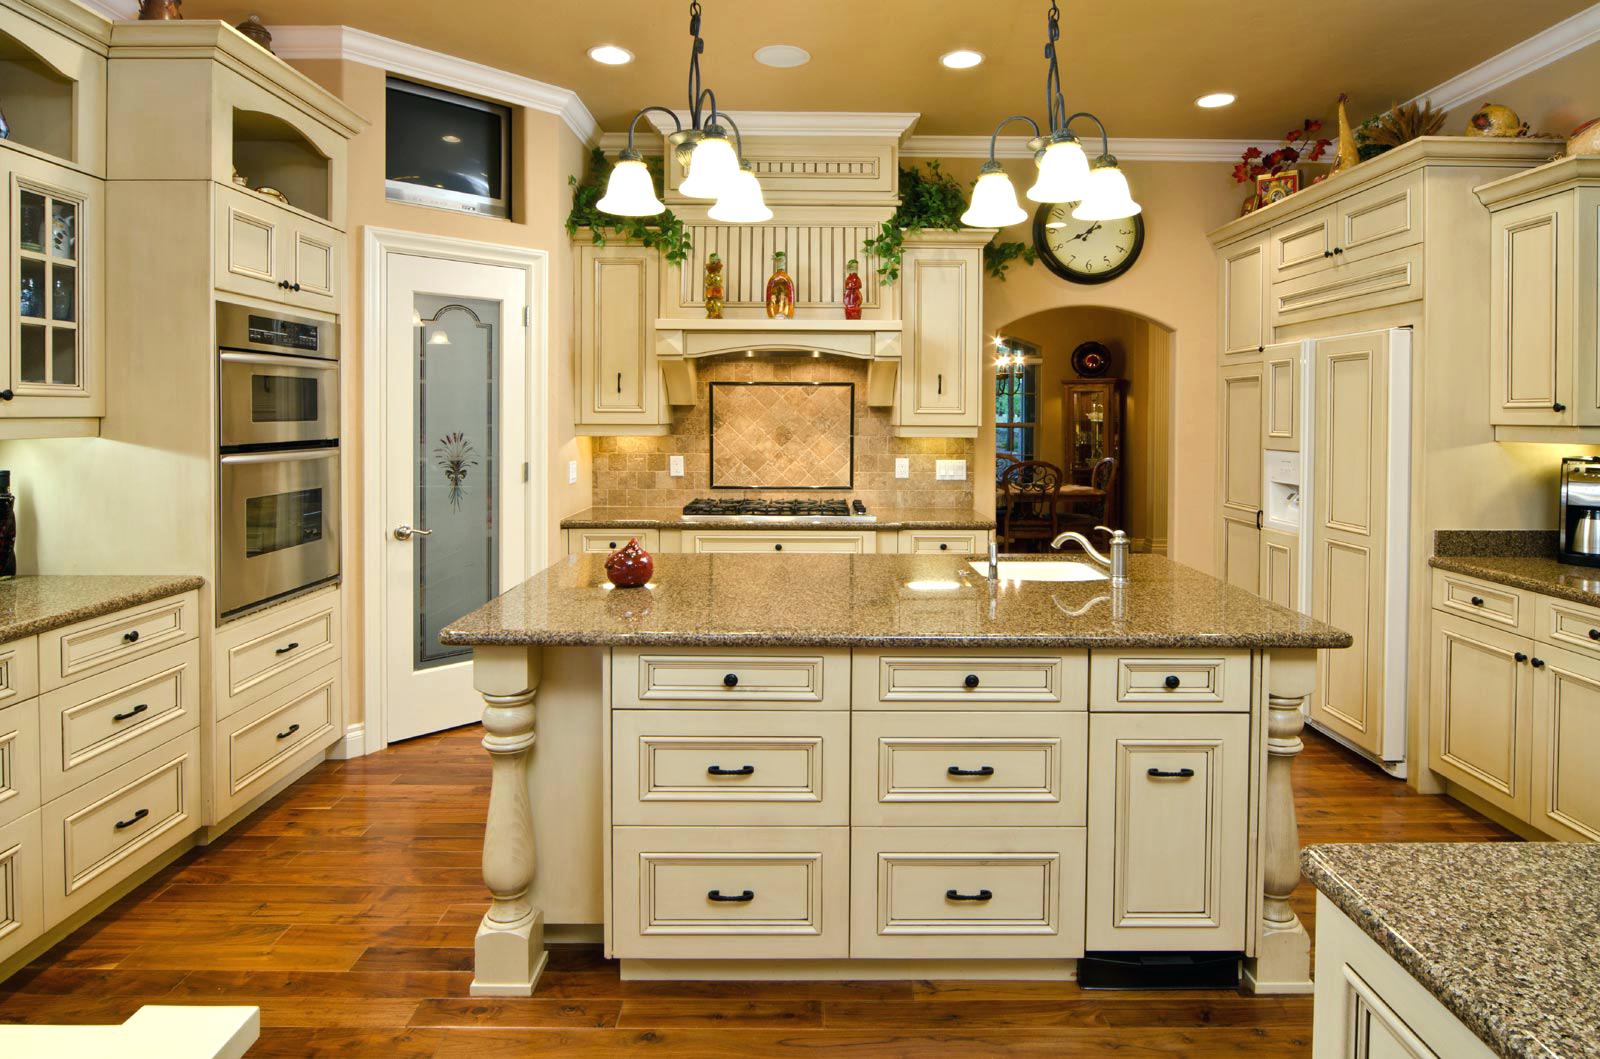 ersatz french country kitchen remodeling ideas antique style white ...